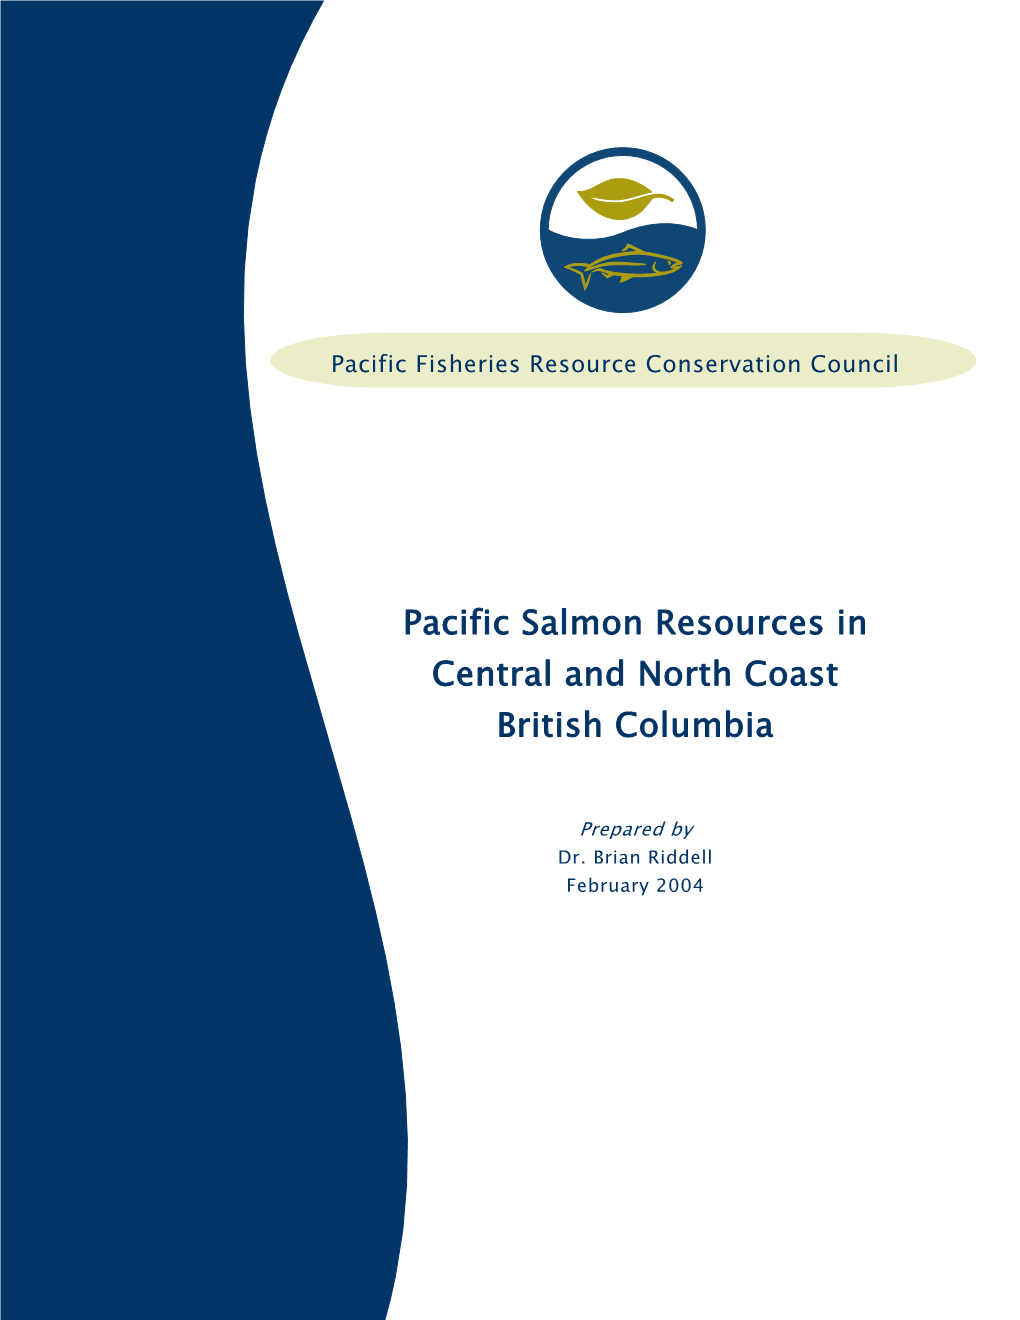 Pacific Salmon Resources in Central and North Coast British Columbia